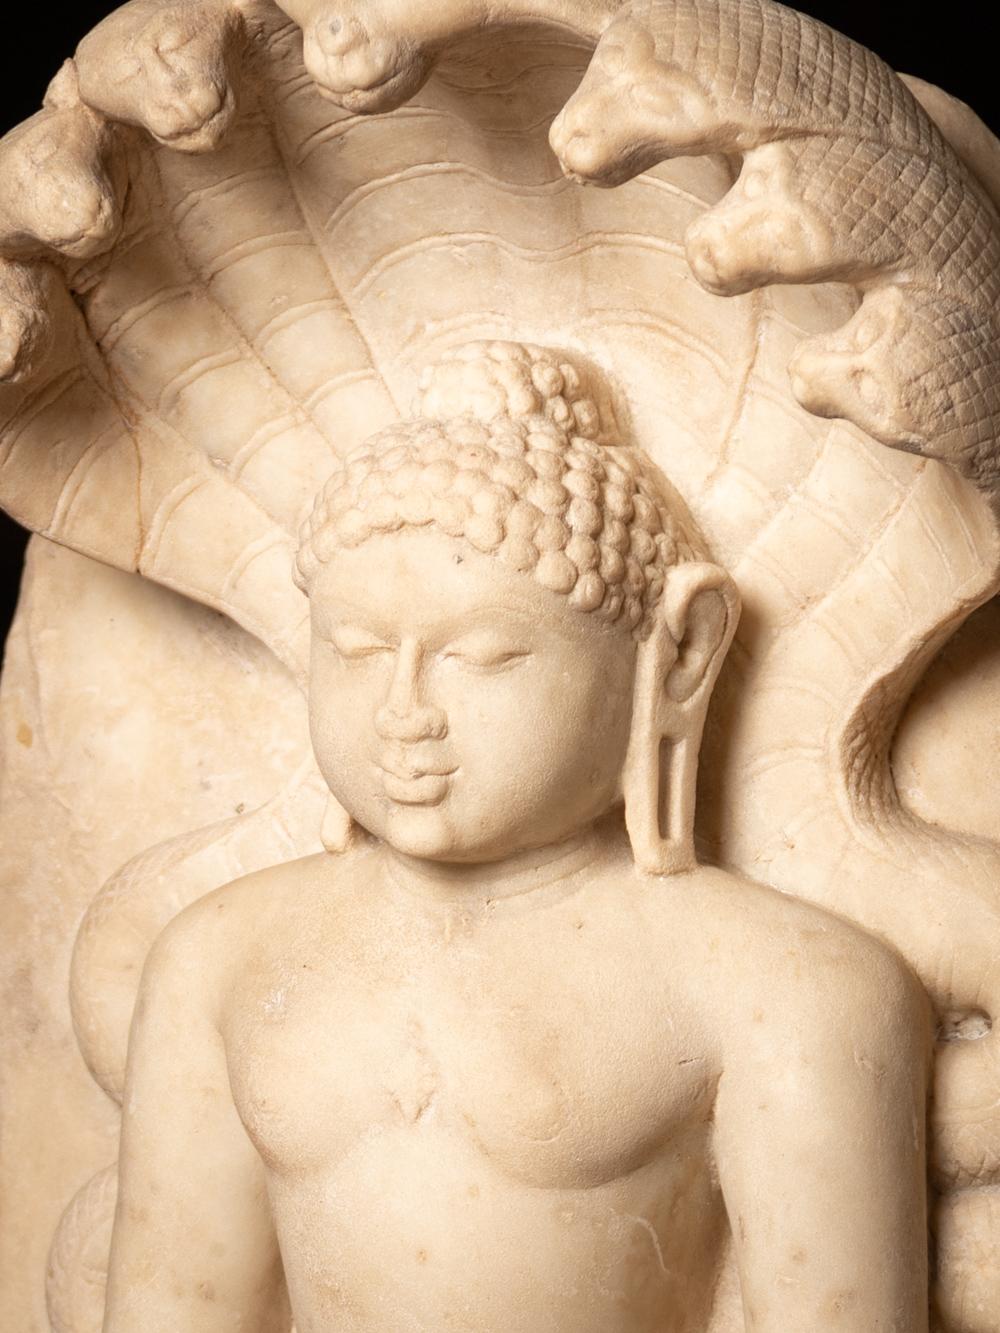 Material : marble
101 cm high
The black wooden base is 60 cm wide and 40 cm deep
The marble statue itself is 67 cm high
Dhyana mudra
15th century (or earlier)
Pictured is Parshvanatha, the 23rd Tirthankar
With snakes at the top and lions at the